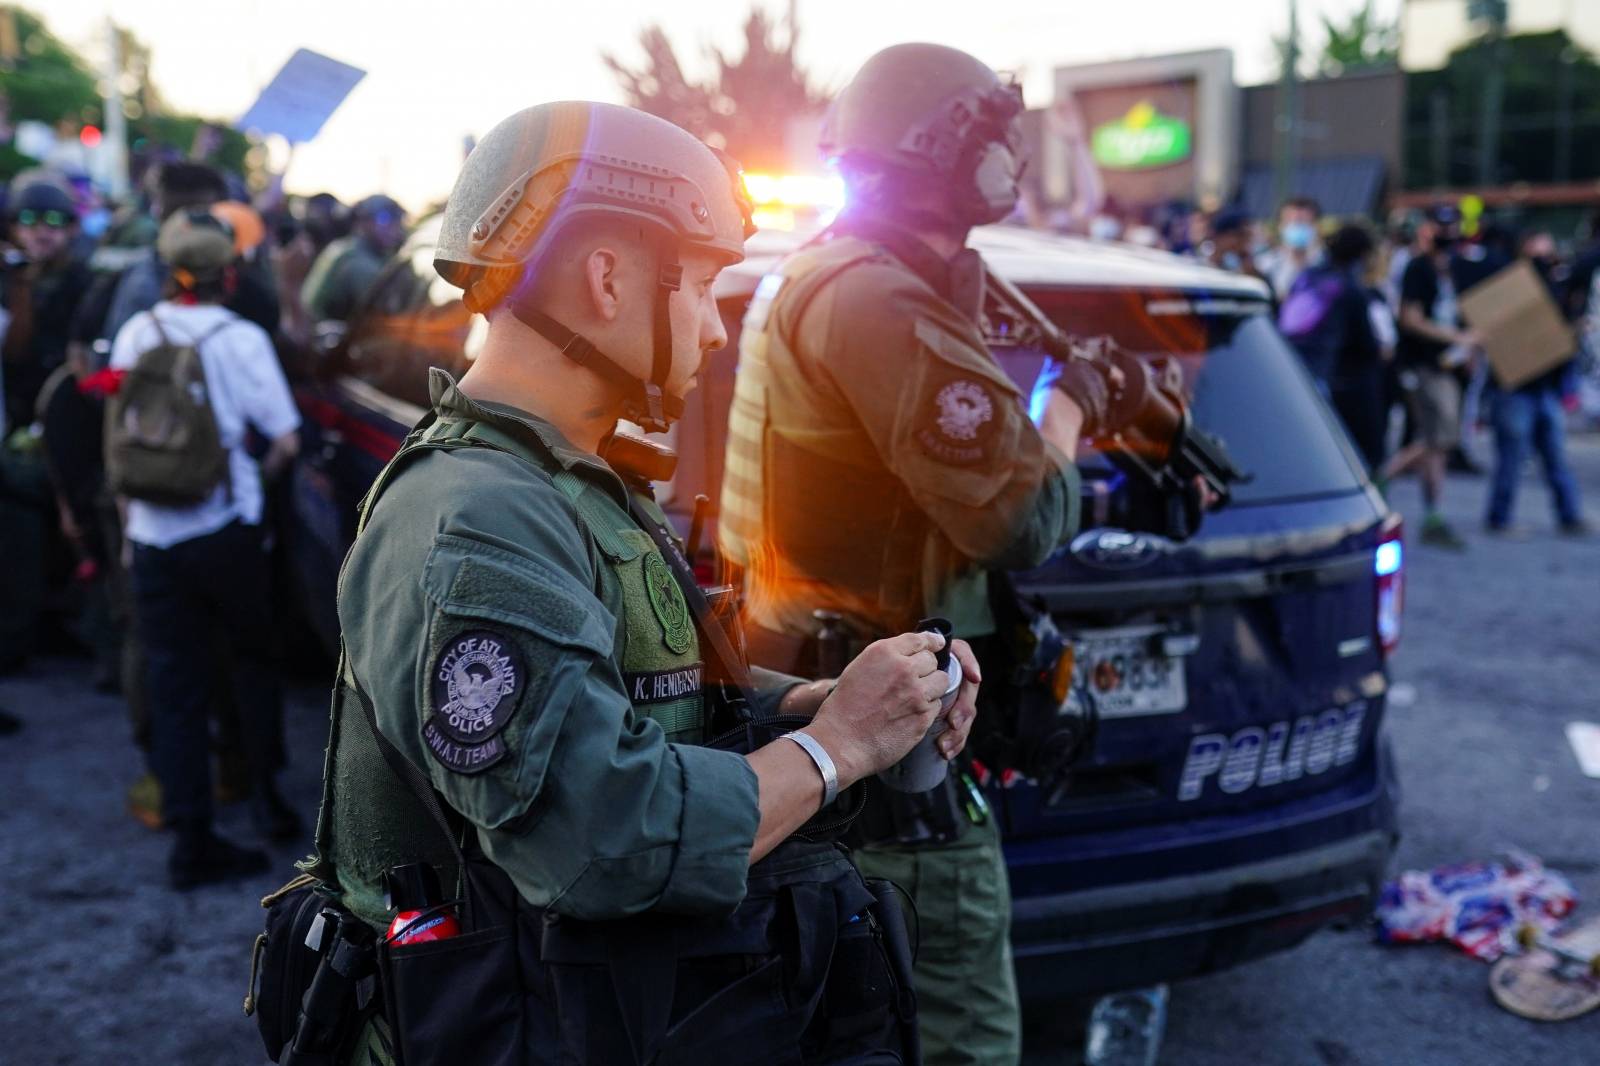 Atlanta SWAT officers are seen with weapons out during a rally against racial inequality and the police shooting death of Rayshard Brooks, in Atlanta